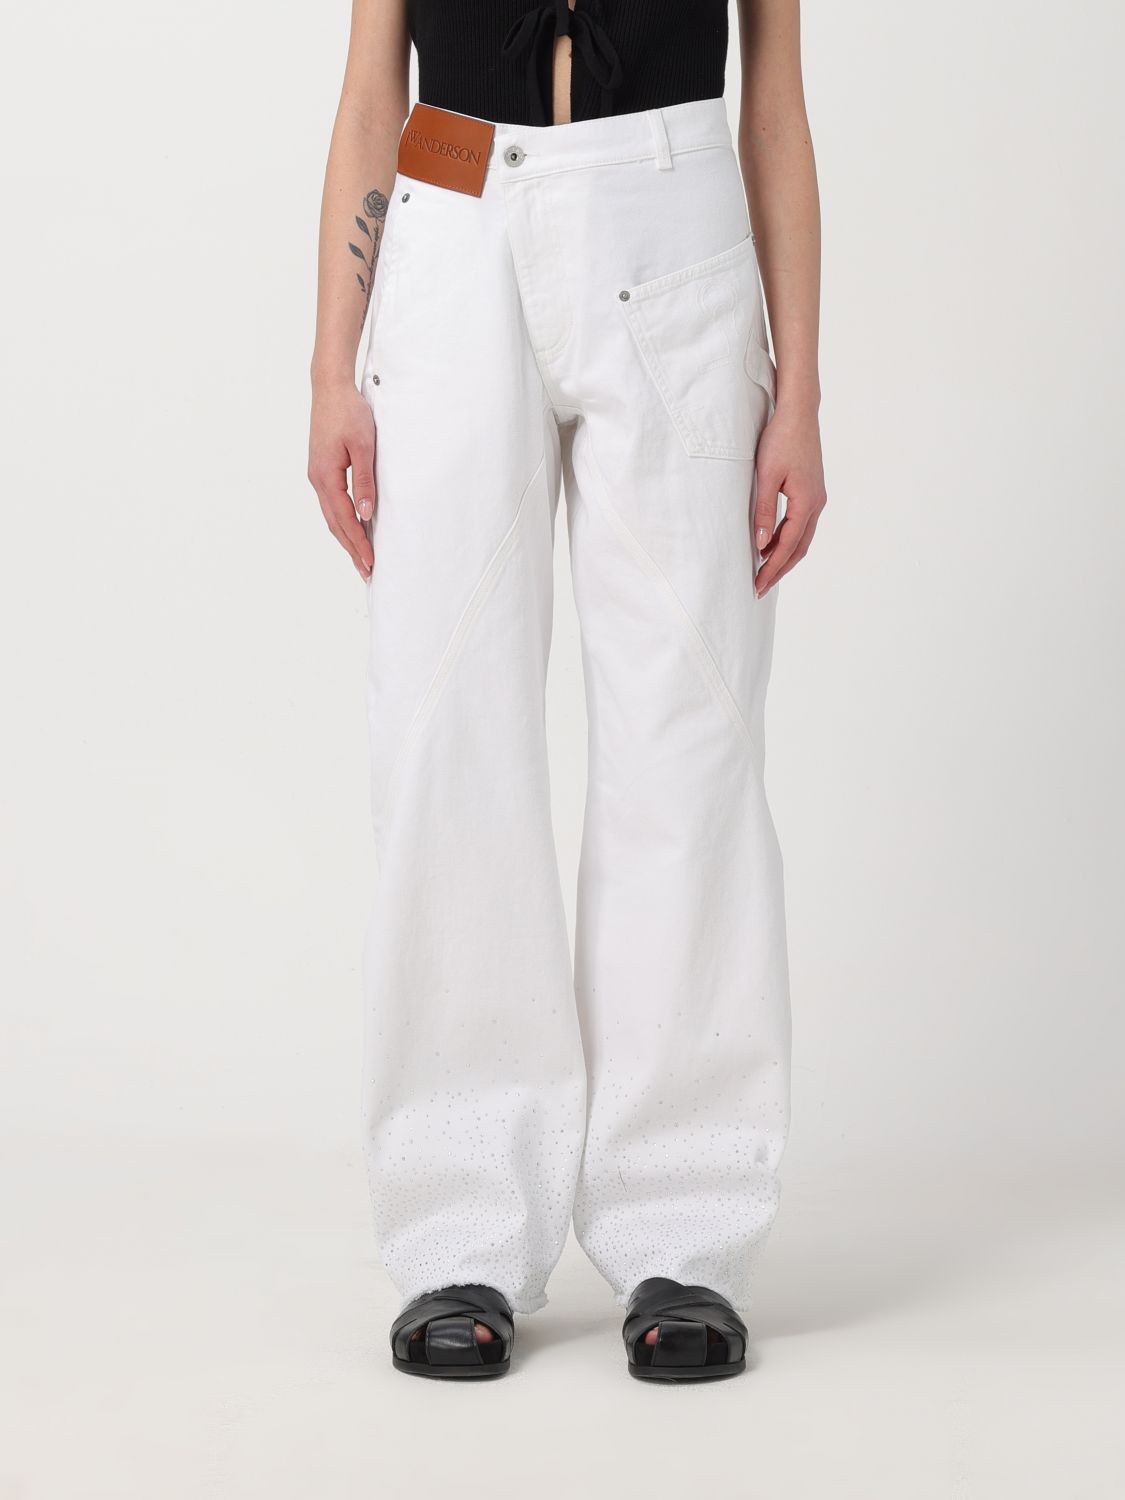 JW ANDERSON JEANS JW ANDERSON WOMAN COLOR WHITE,F51143001